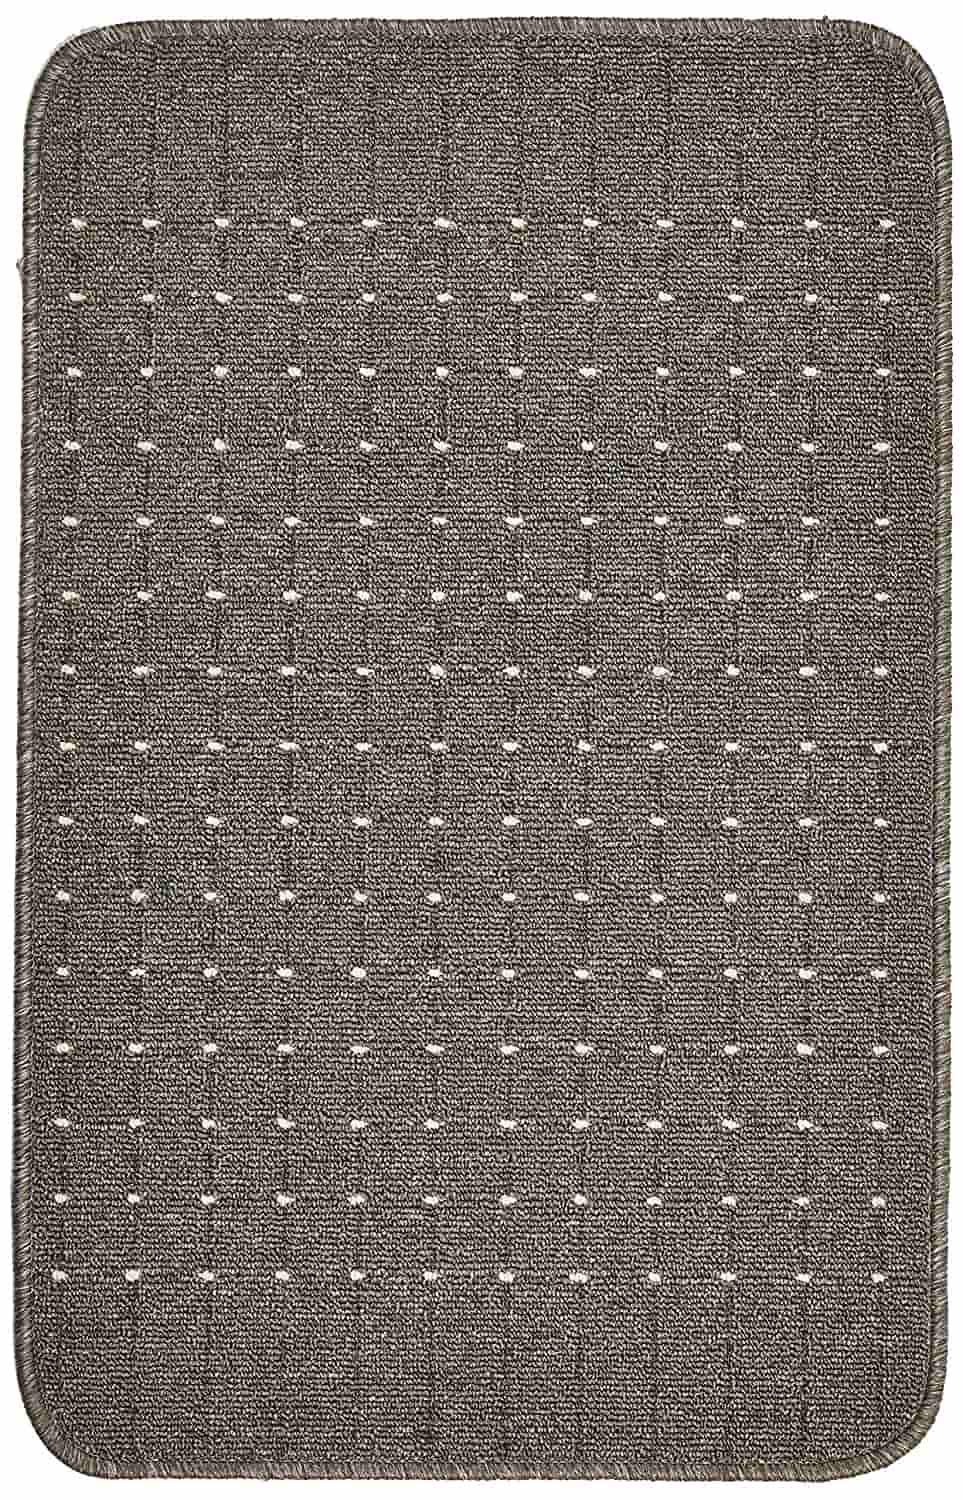 Dandy Stanford Area Rug 80 x 50cm Washable Mats (Assorted Colours) 